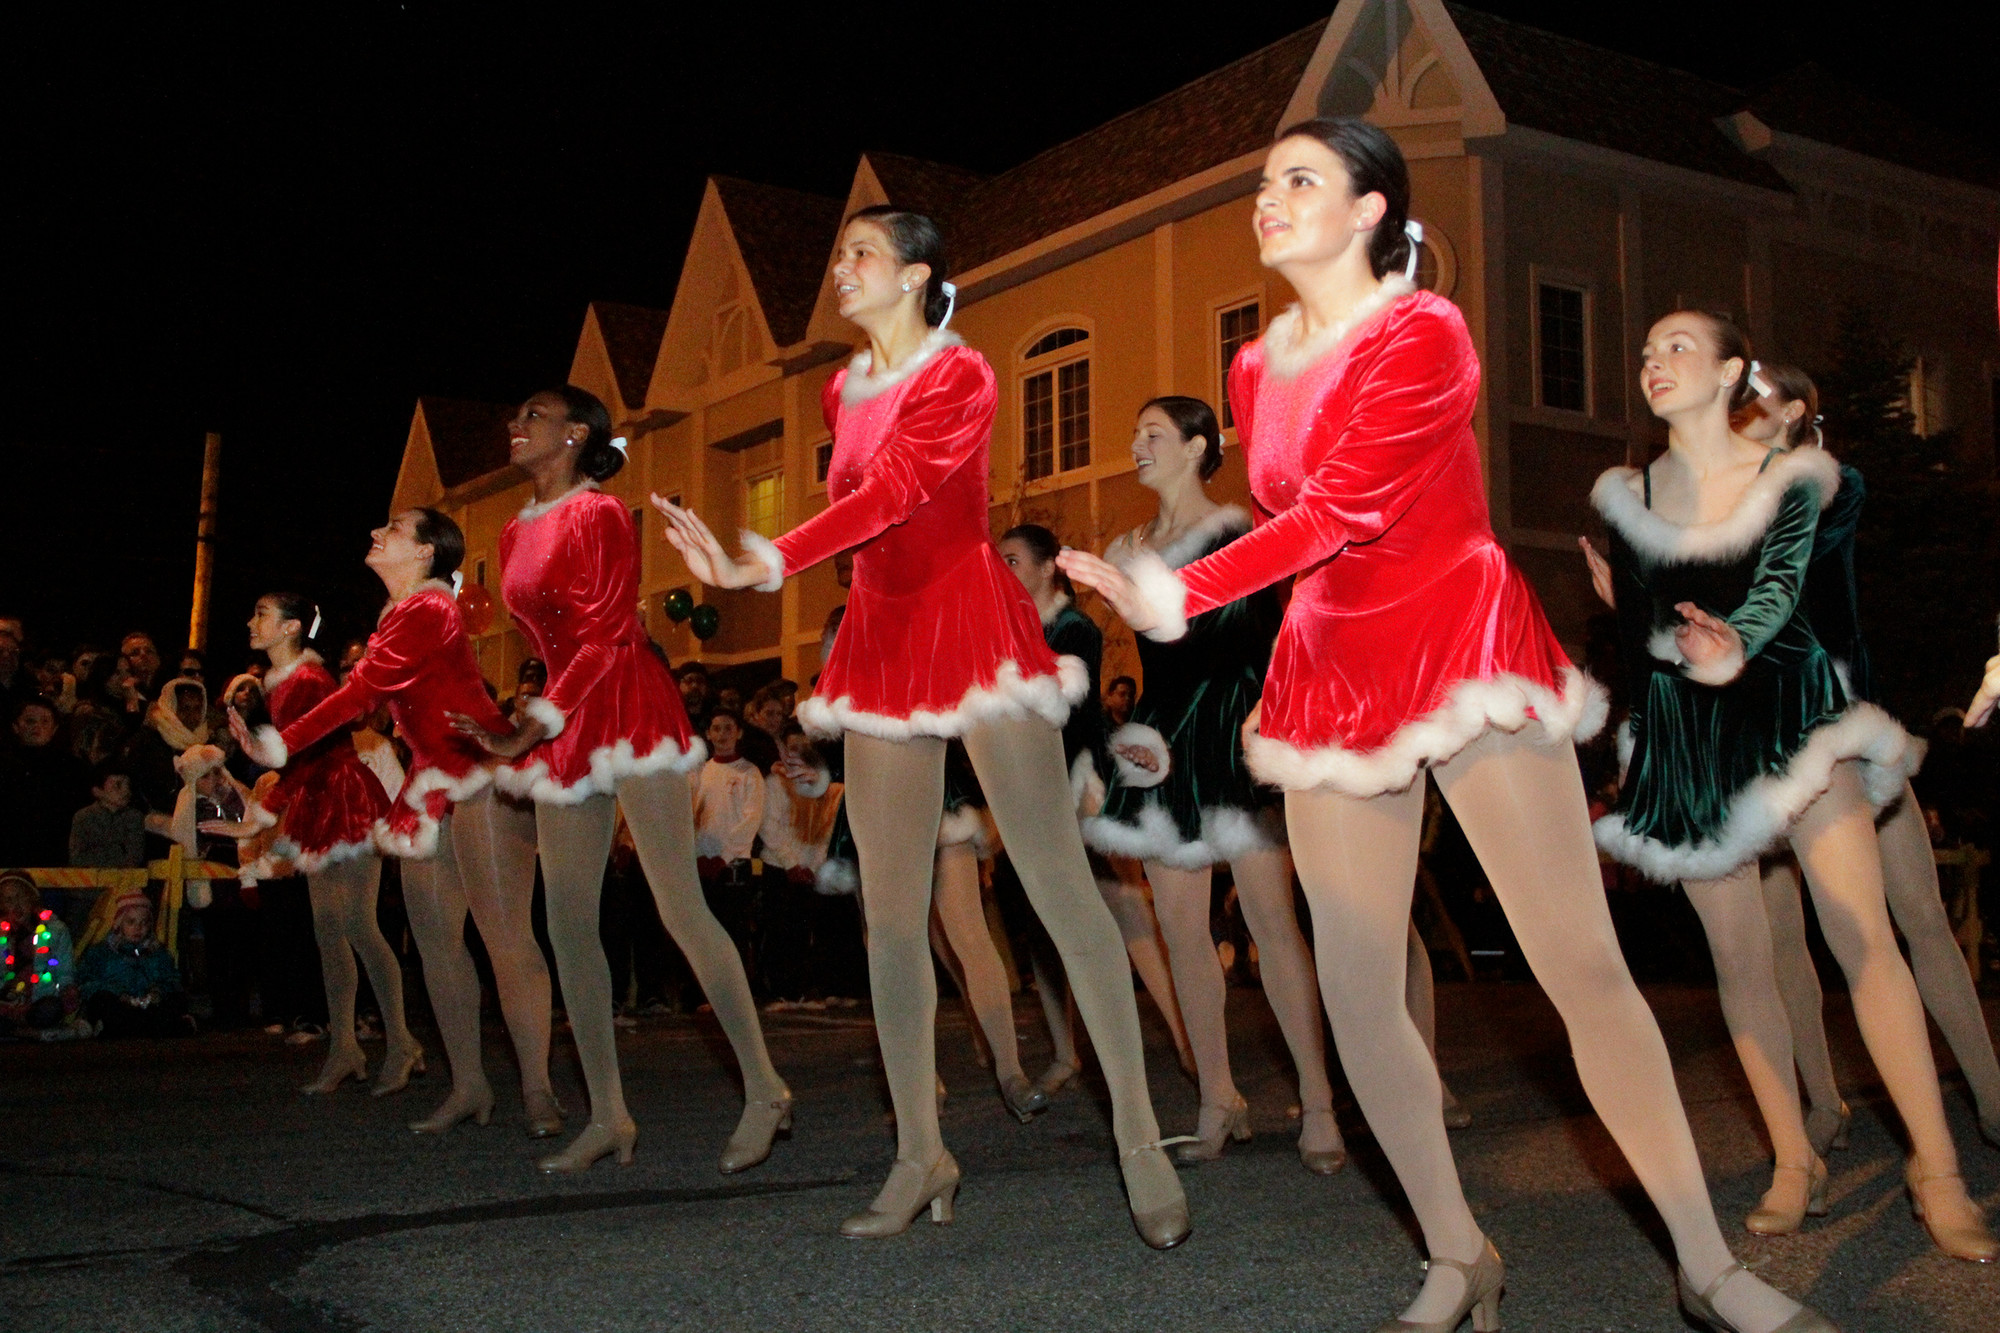 The Tap to Pointe dancers performed to Christmas tunes on Church St.